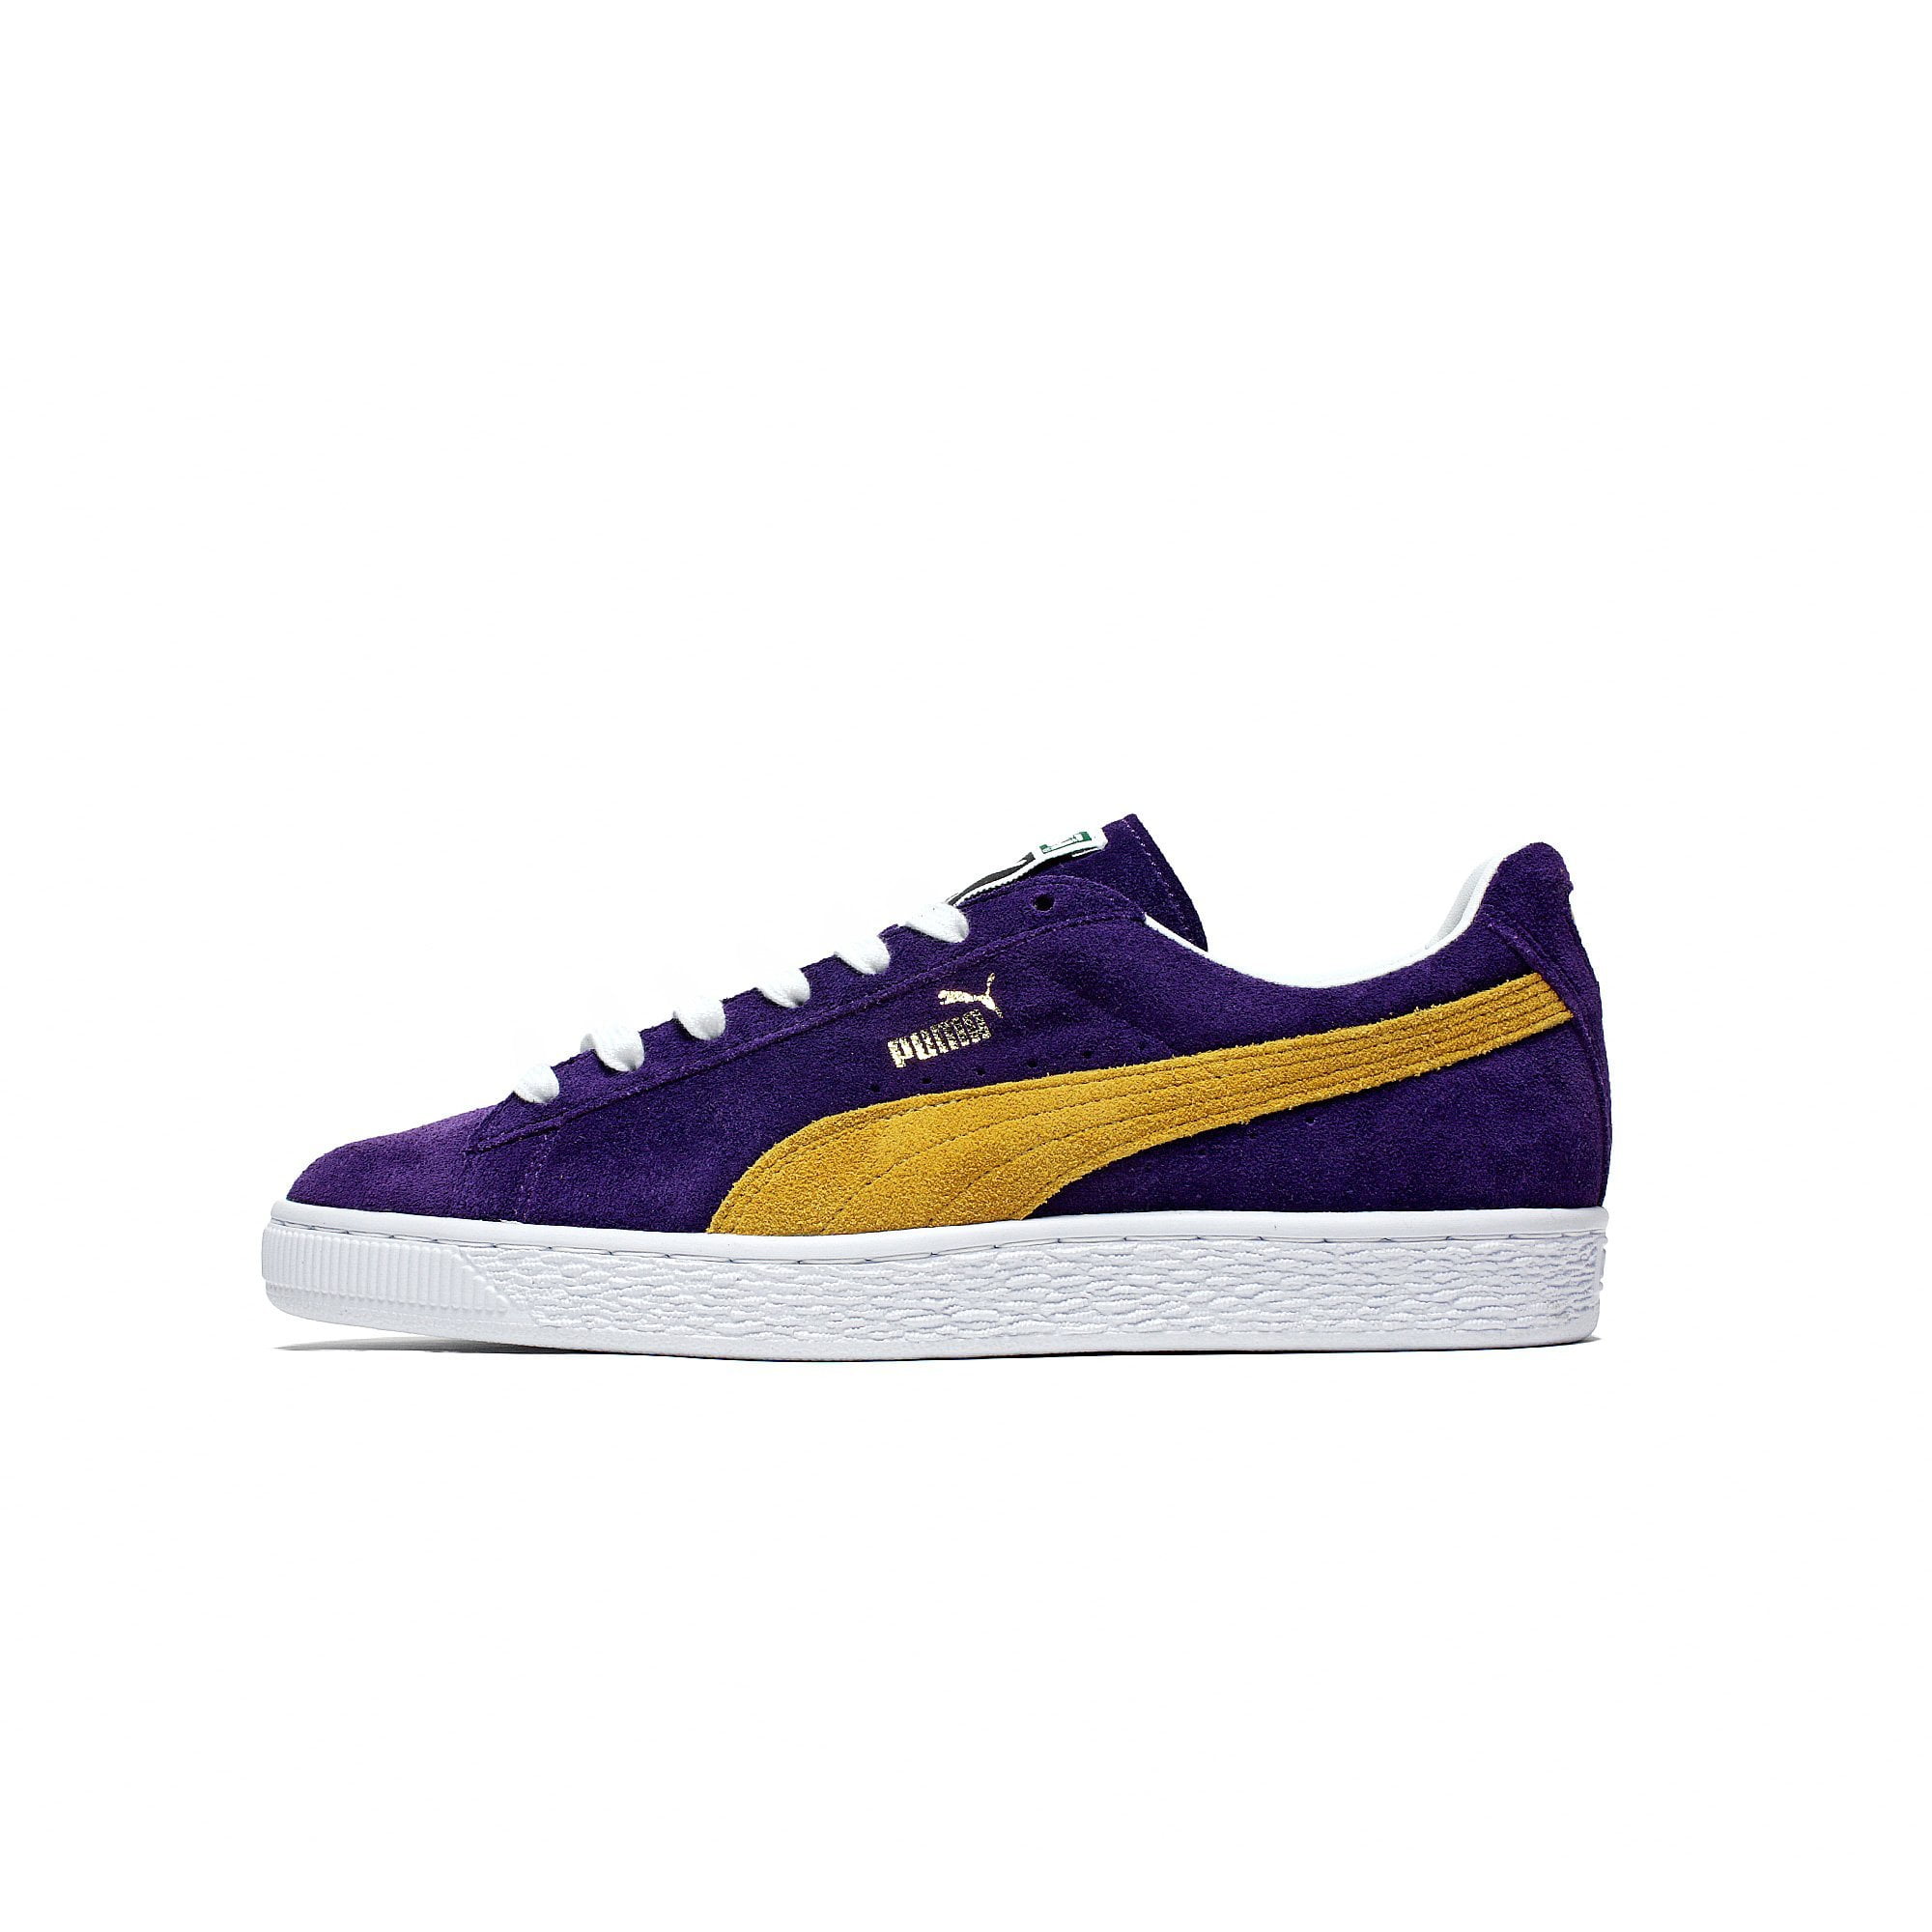 puma suede purple and yellow